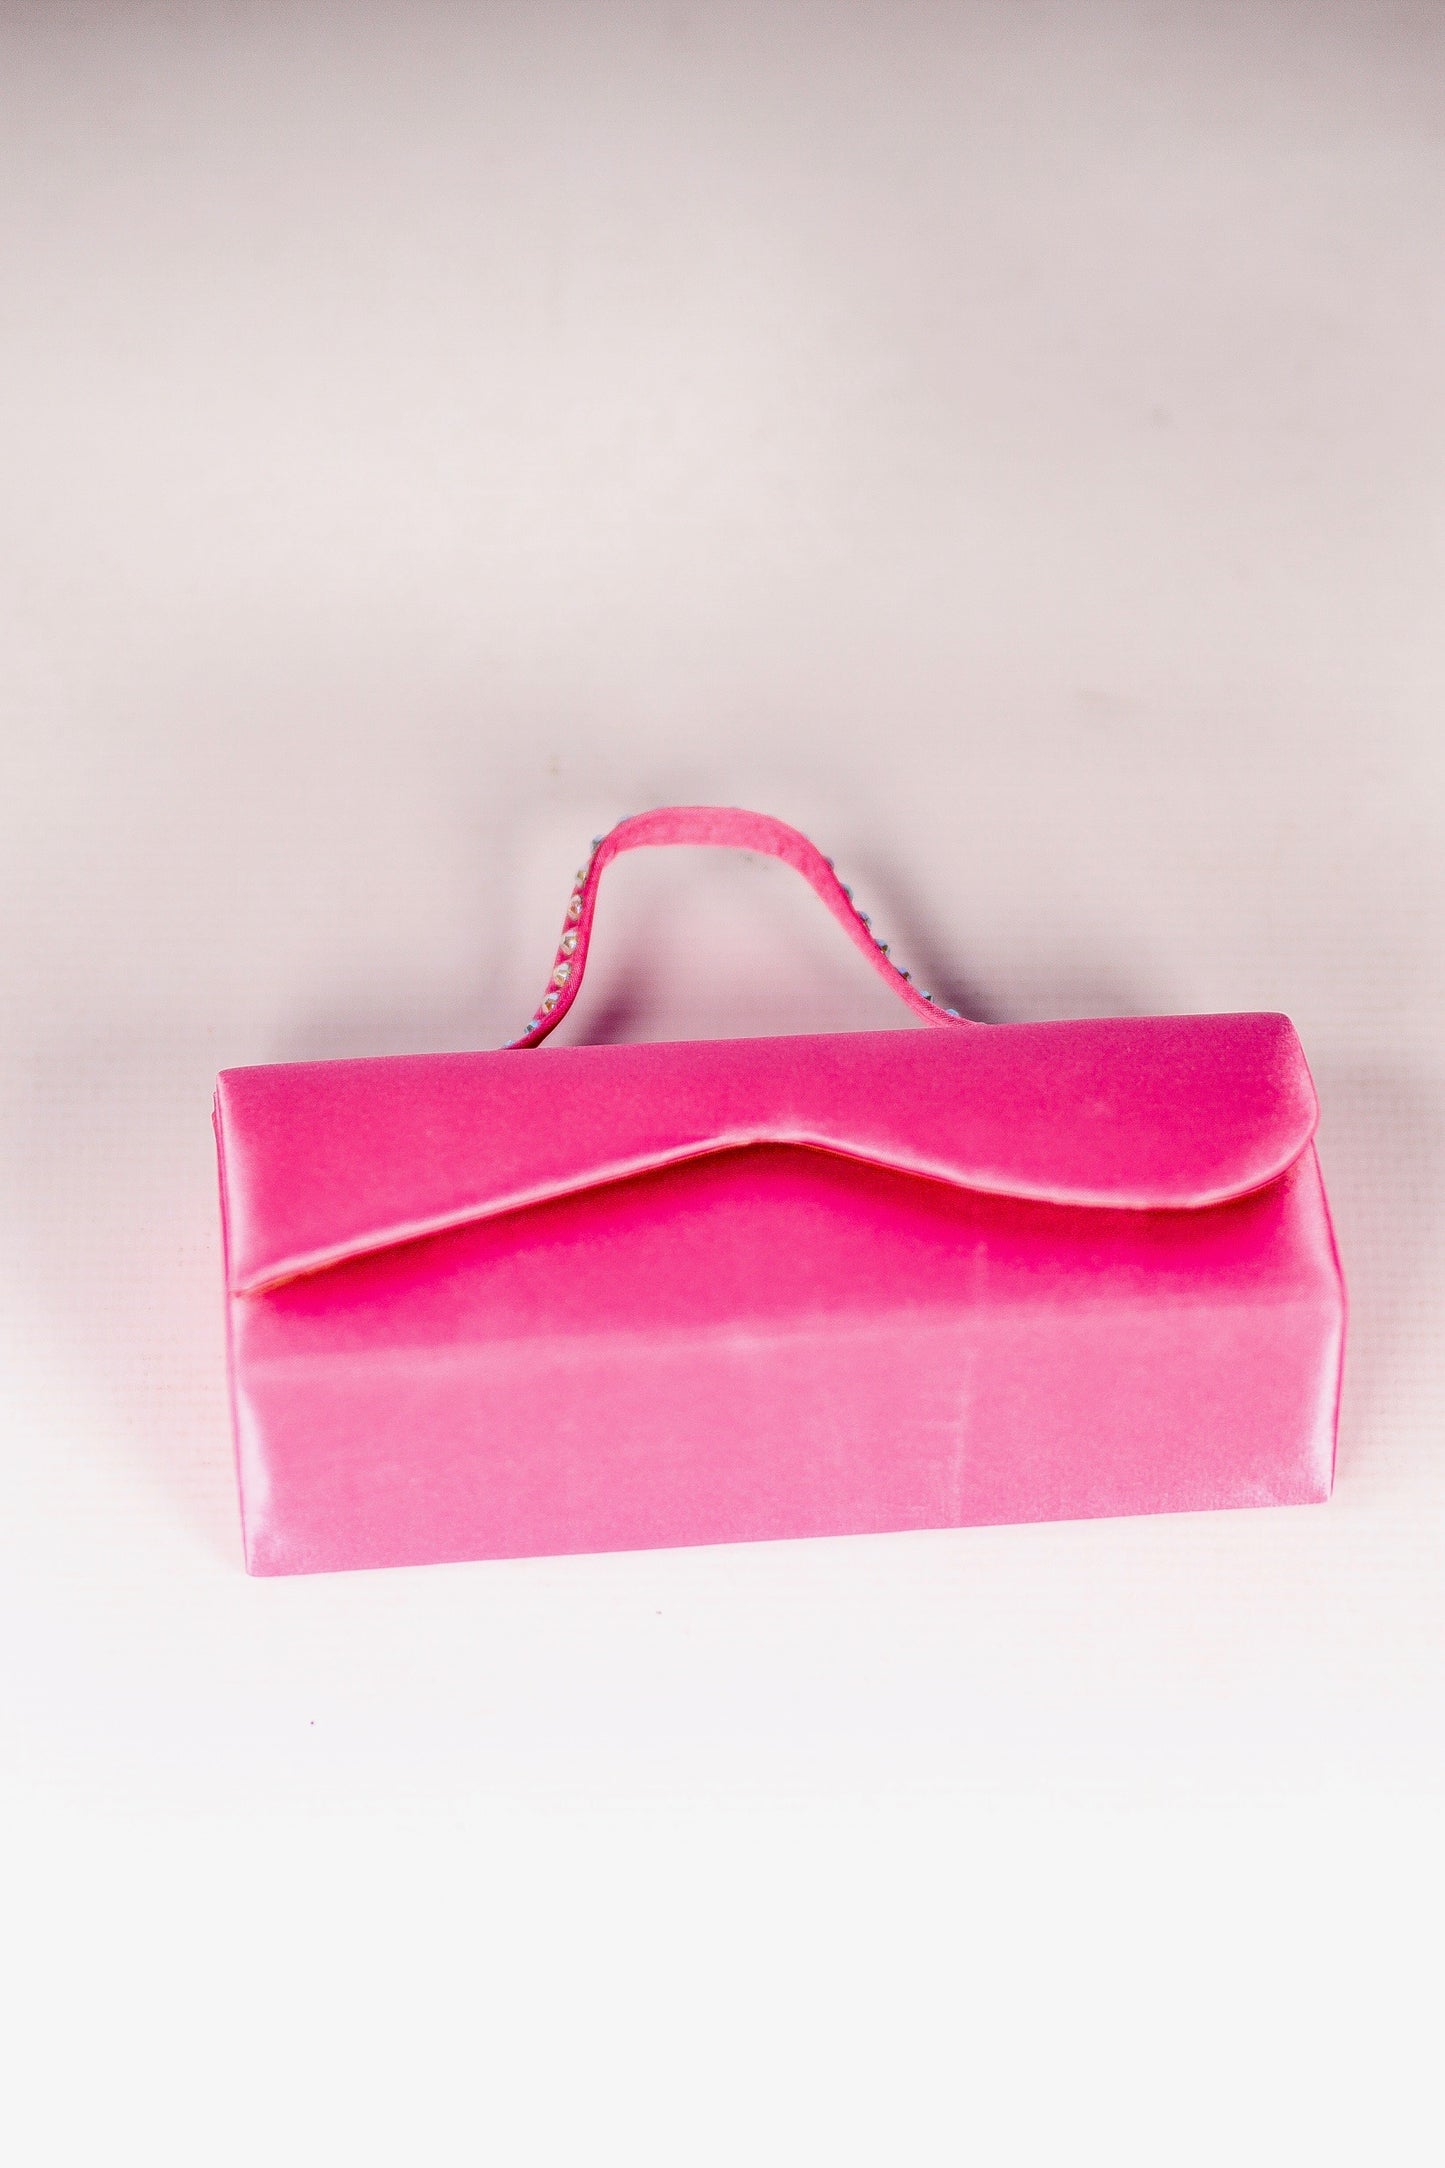 the lerato bag in pink